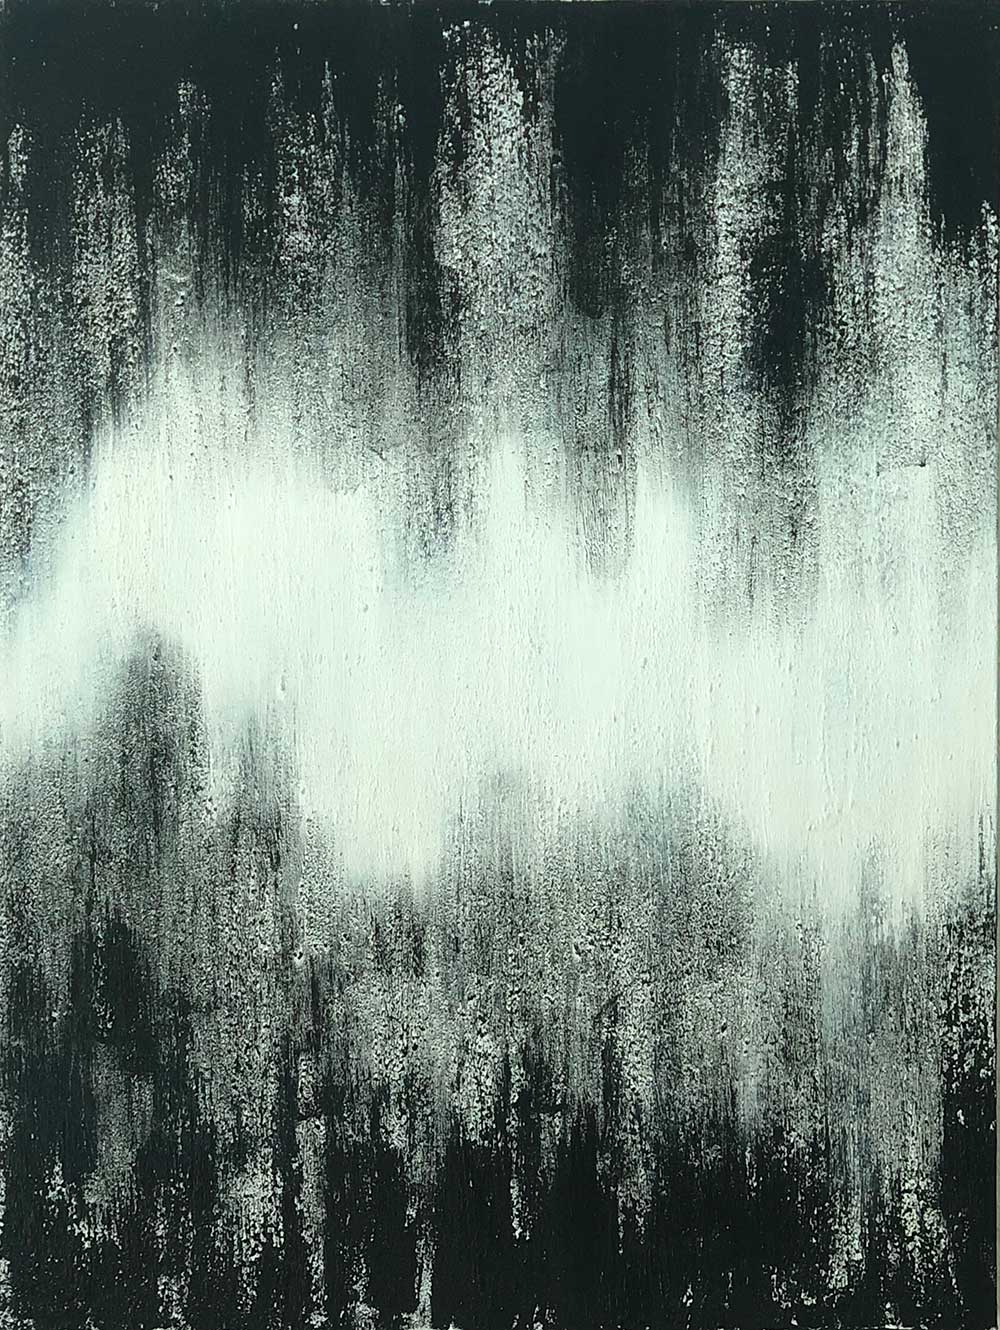 Static by Chuck Prescott | 30x40 in | Mixed Media on Canvas